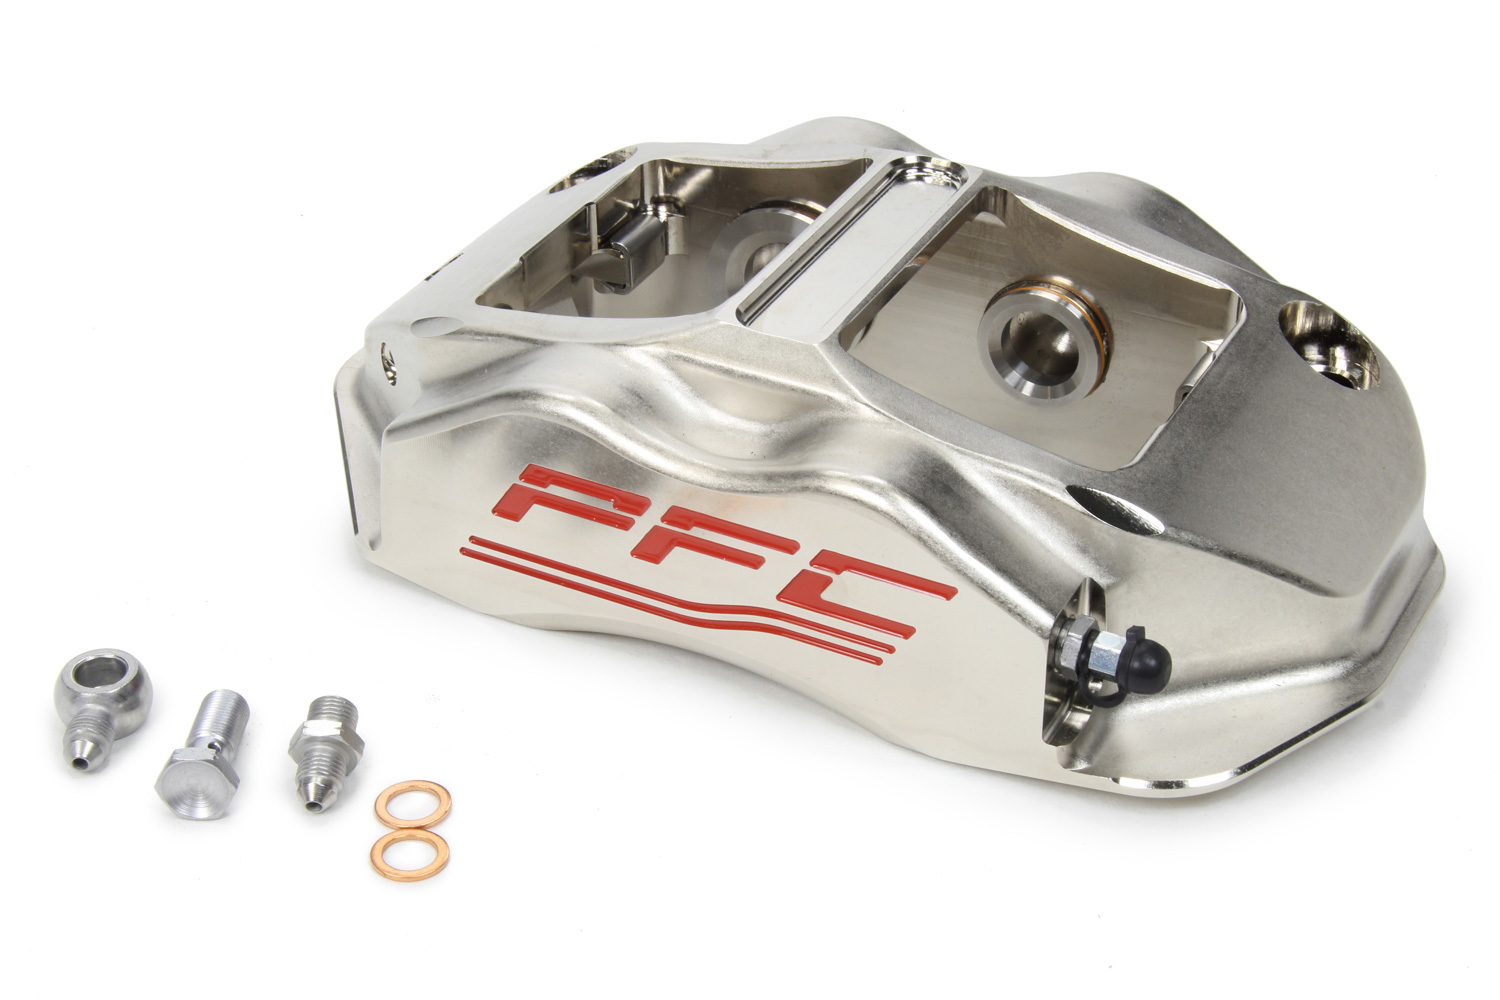 Performance Friction 94.323.410.440.12 Brake Caliper, ZR94, Passenger Side, Trailing, 4 Piston, Aluminum, Nickel Plated, 12.716 in OD x 1.250 in Thick Rotor, 7.00 in Radial Mount, Each